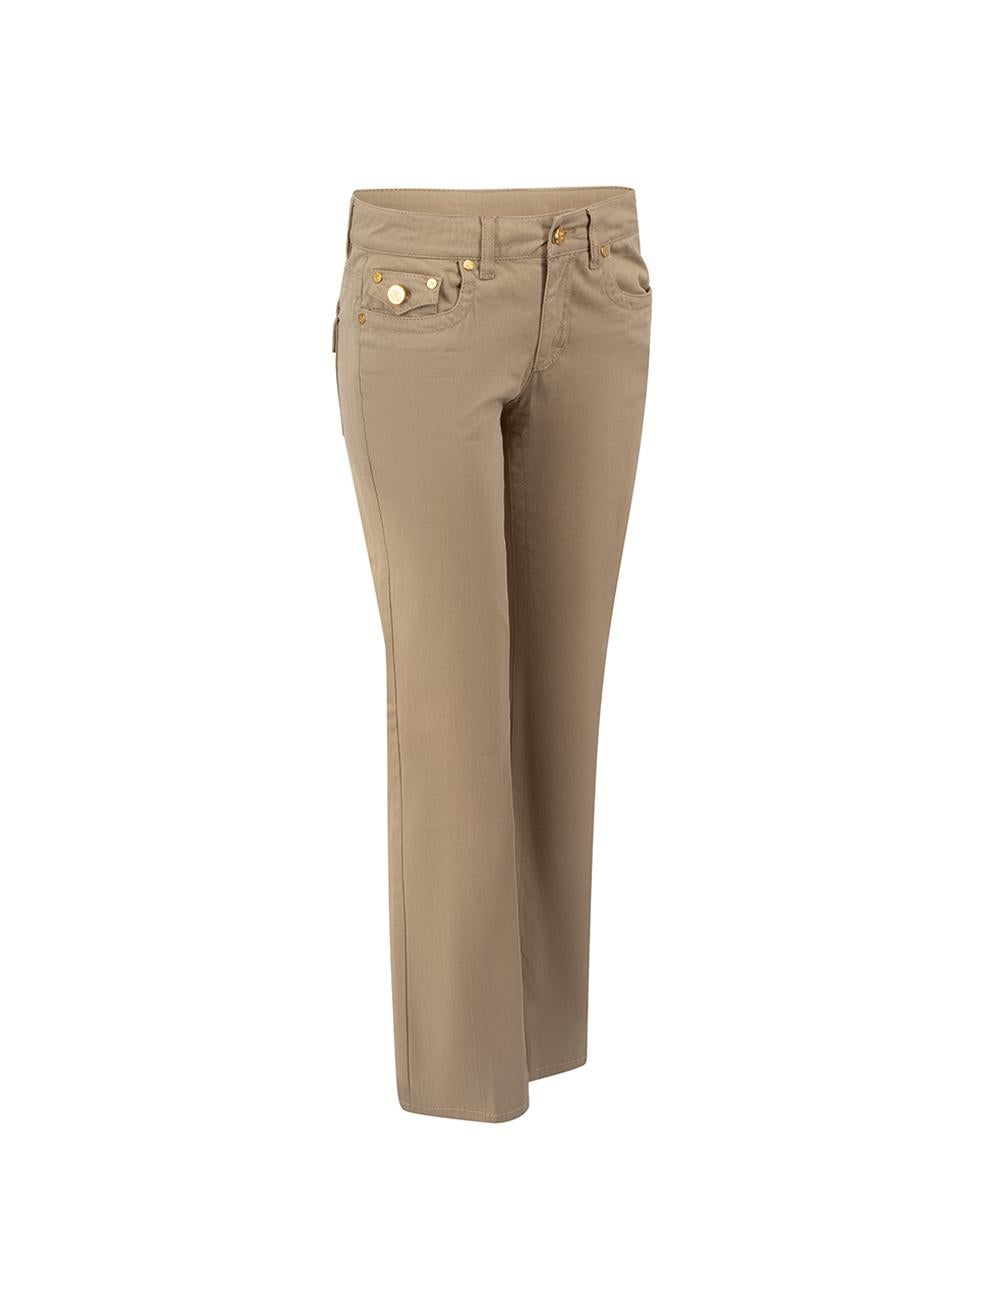 Roberto Cavalli Light Brown Flared Trousers Size XS In Excellent Condition For Sale In London, GB